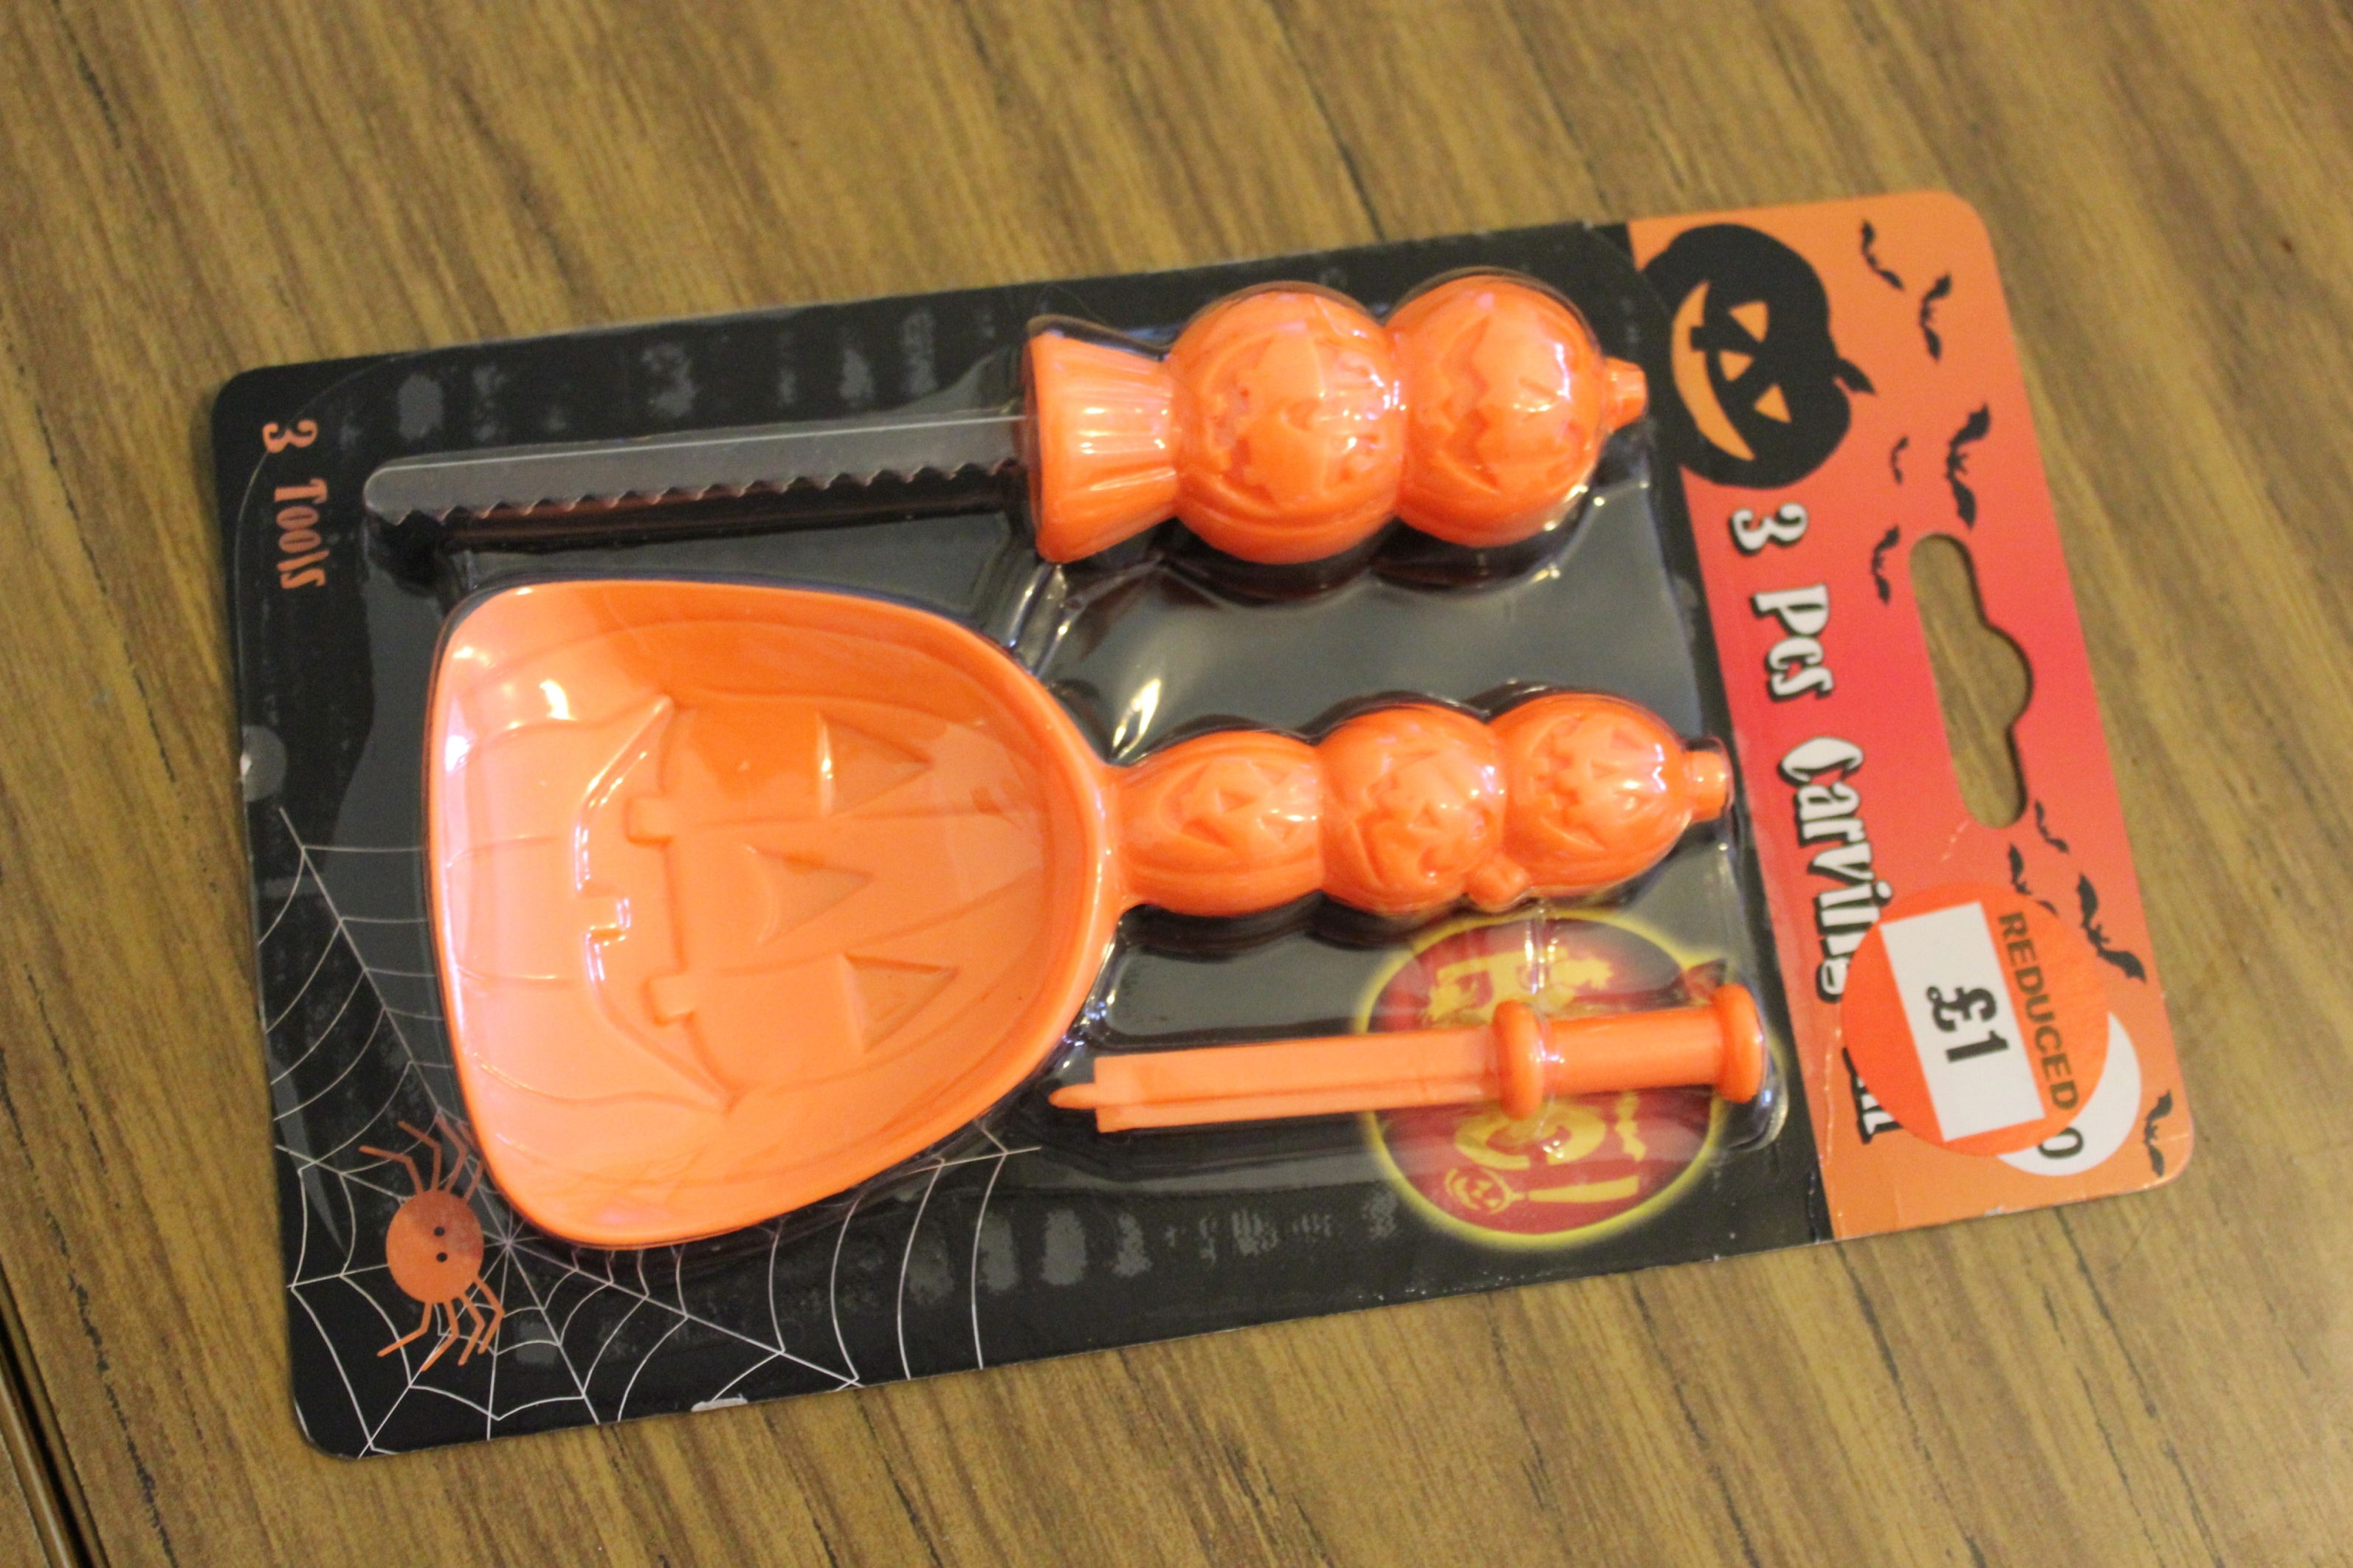 Halloween pumpkin knife carving kit from the factory shop